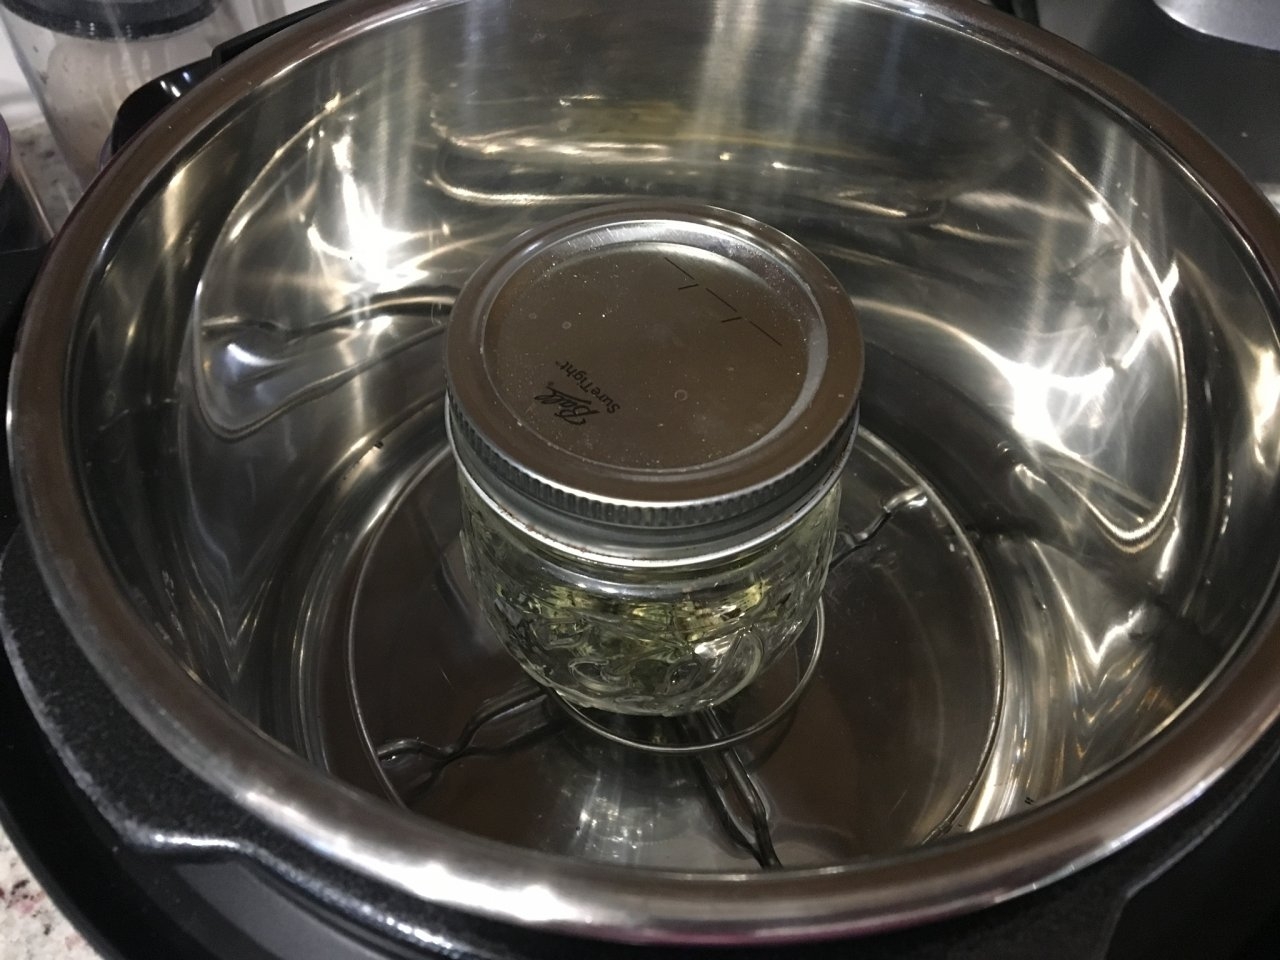 Buds into Instant Pot for decarb